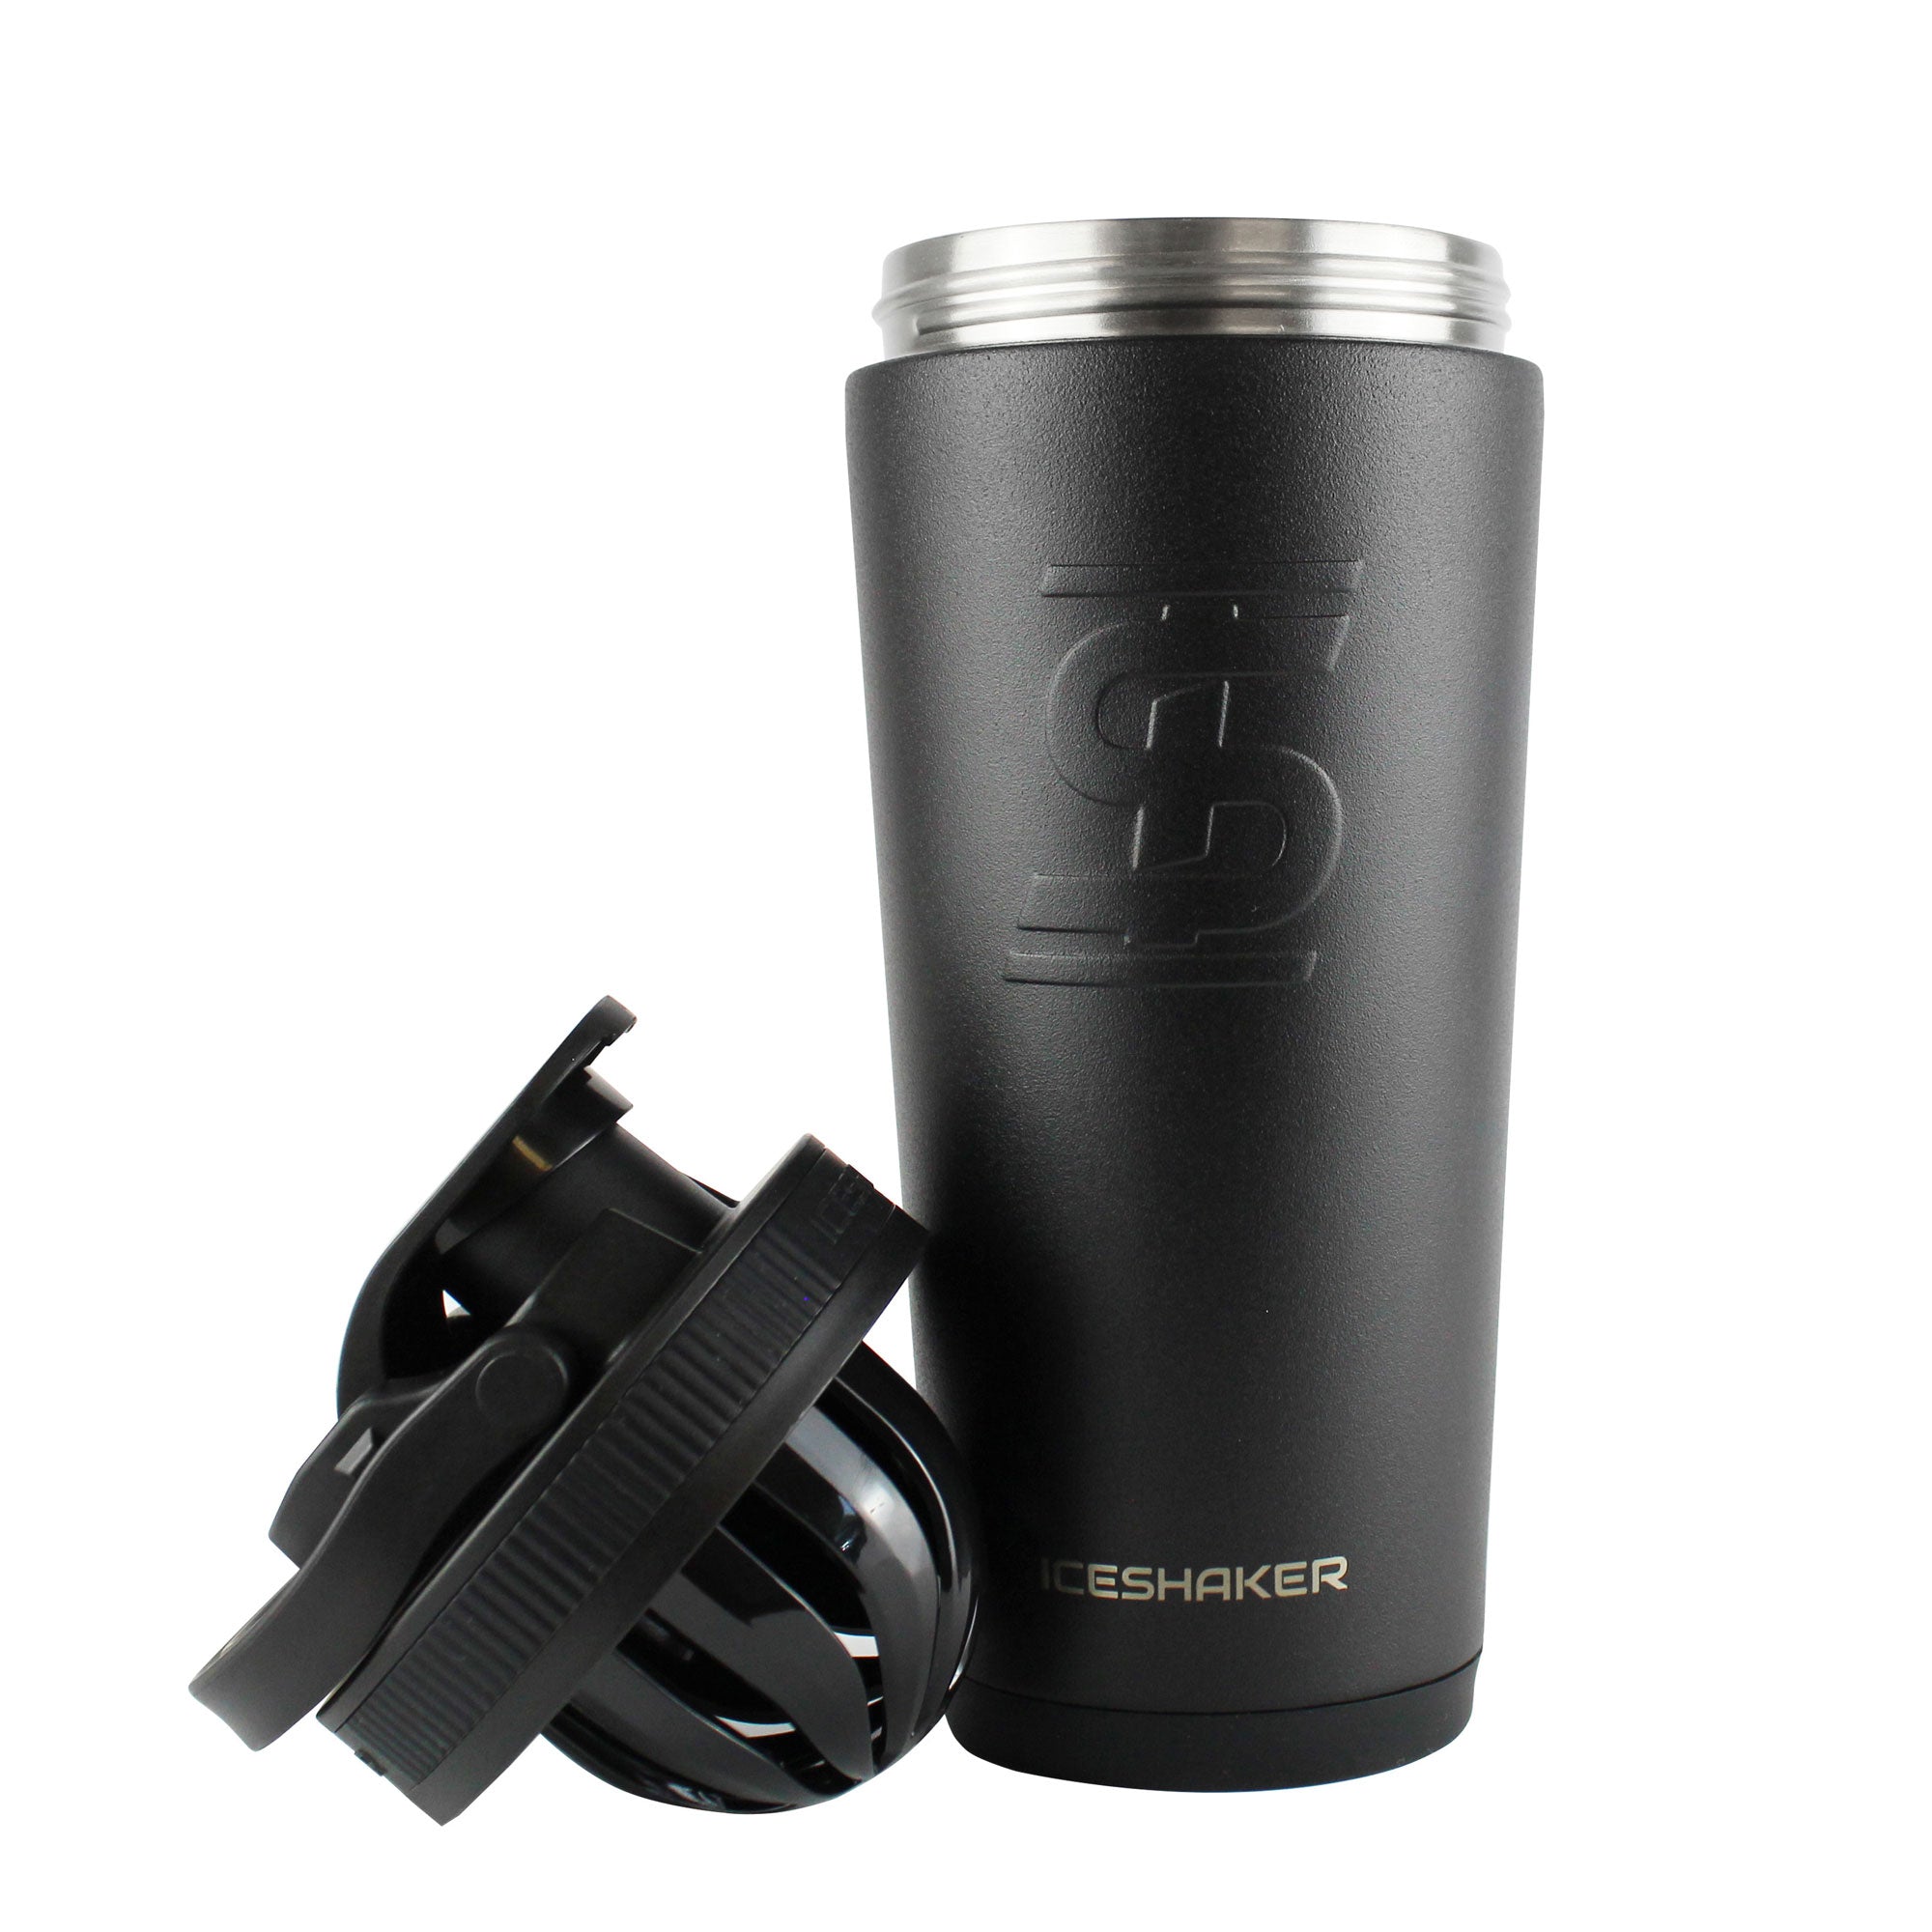 Be A Man (Black) Ice Shaker with Snap Top & Shaker – Boston Be a Man